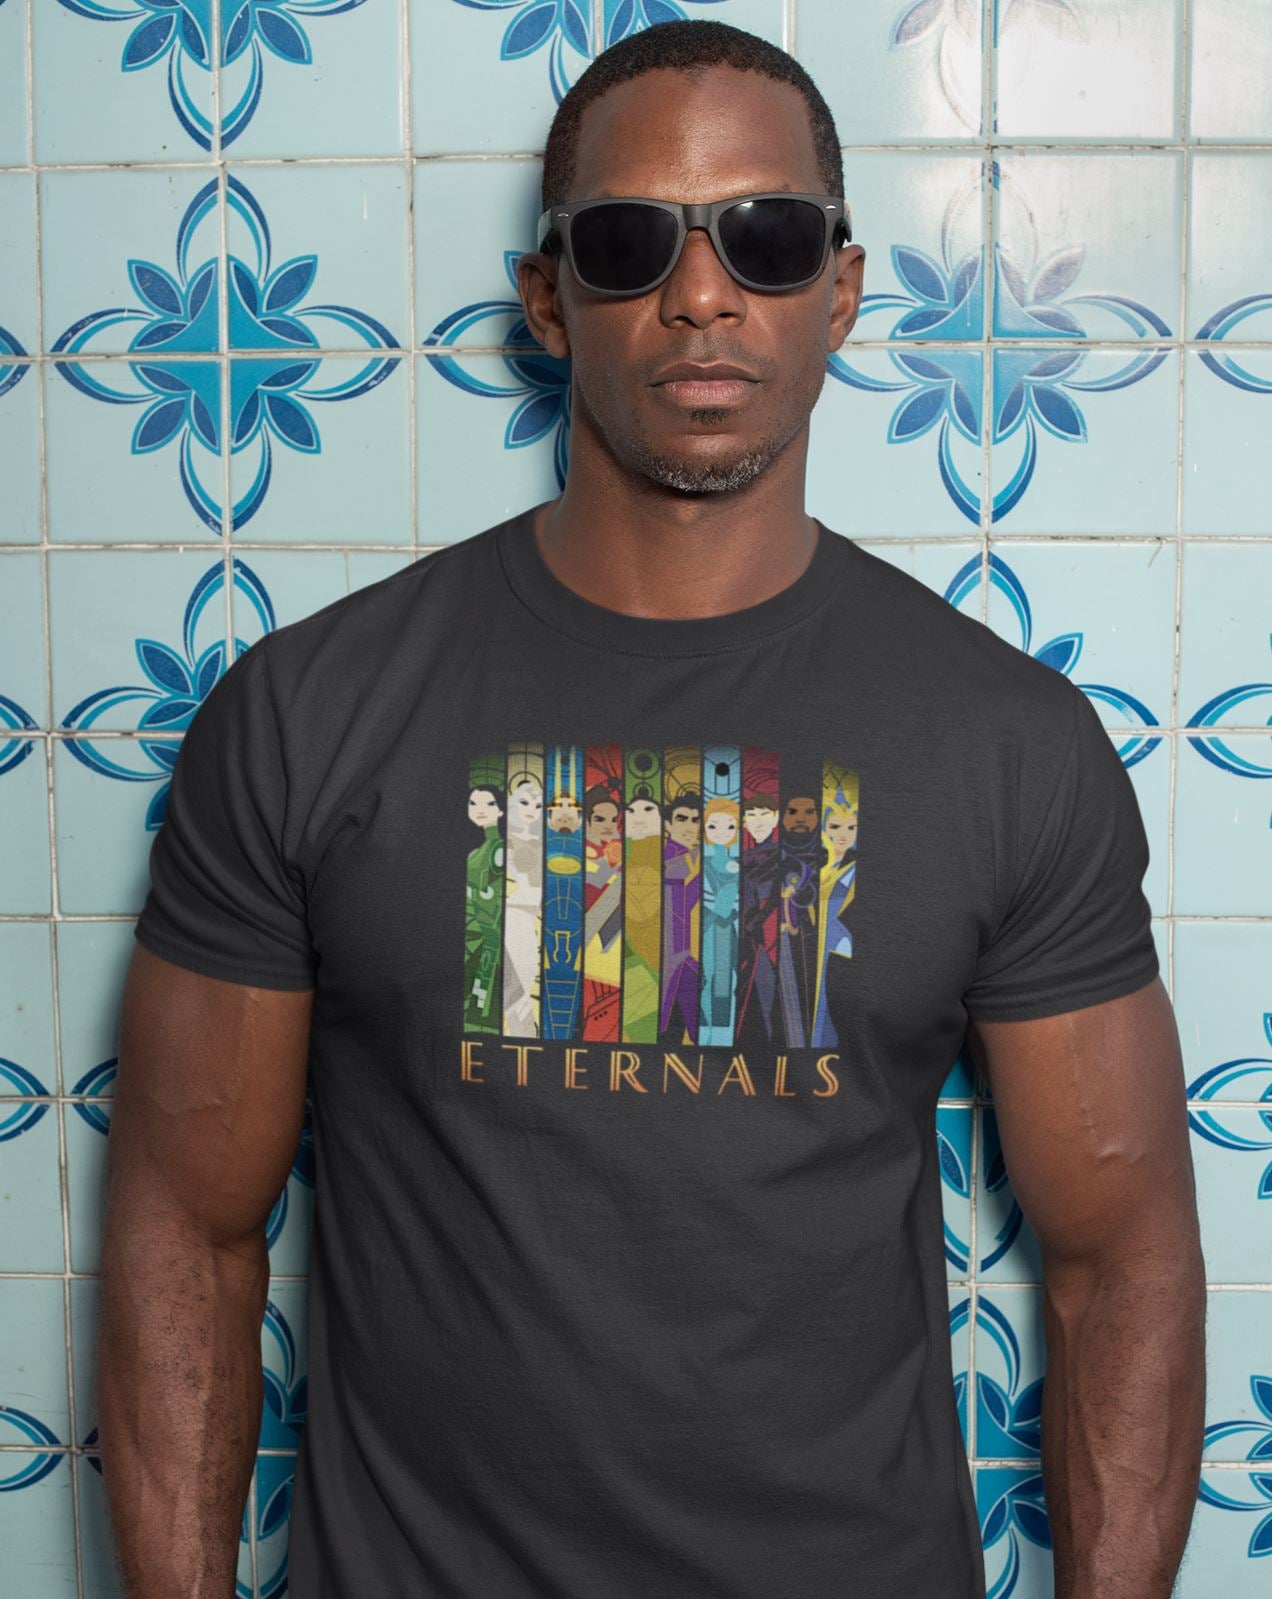 The Eternals Comic Book Version Official Black T Shirt for Men and Women freeshipping - Catch My Drift India